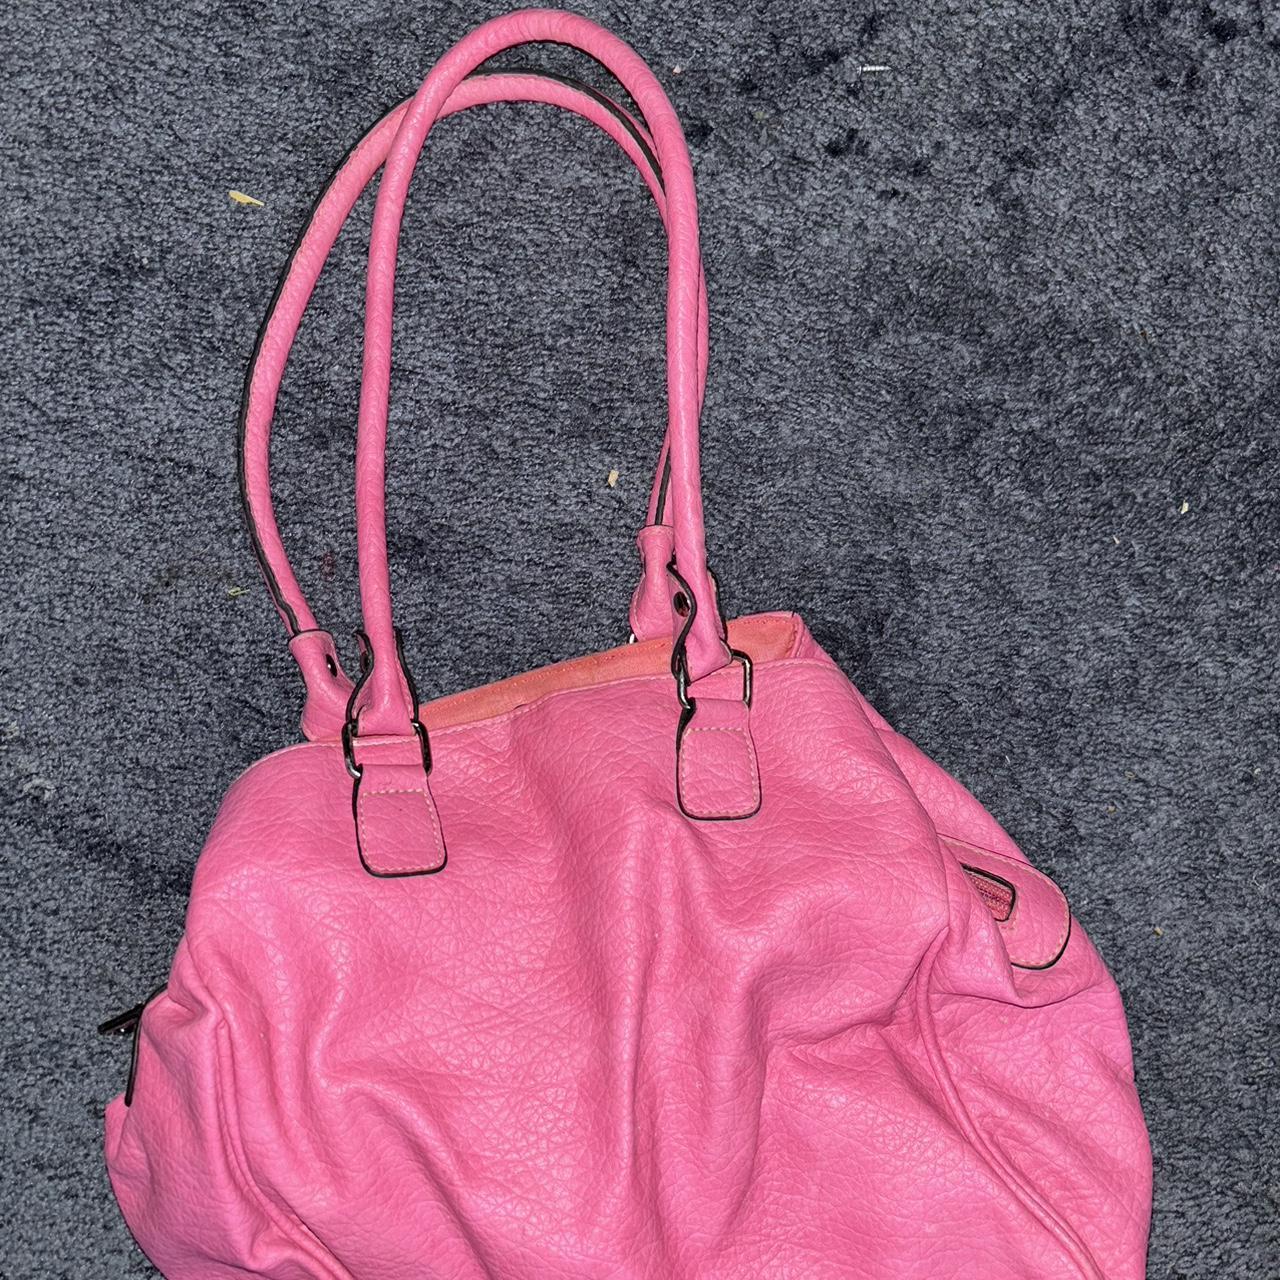 Best Pink Rosetti Purse for sale in Alamosa, Colorado for 2024